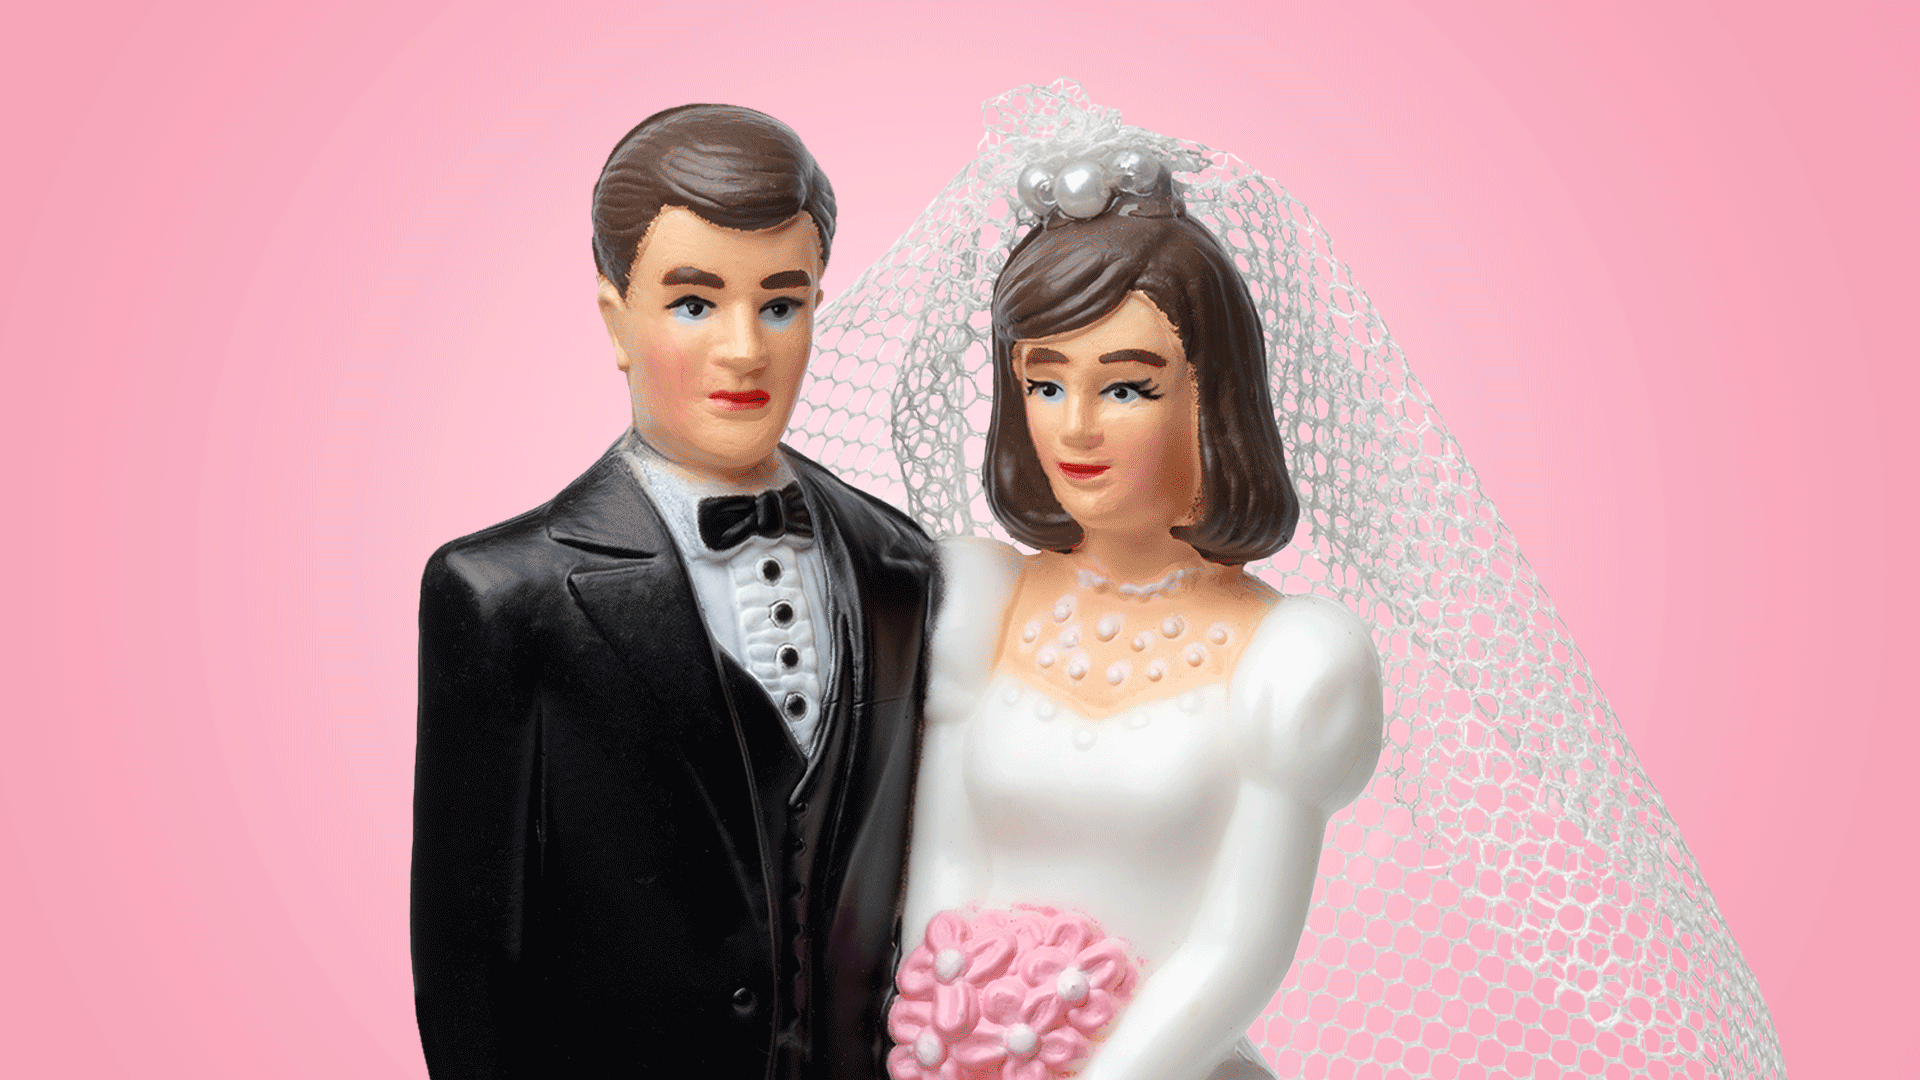 David's Bridal and Bed Bath & Beyond lose grip on wedding industry